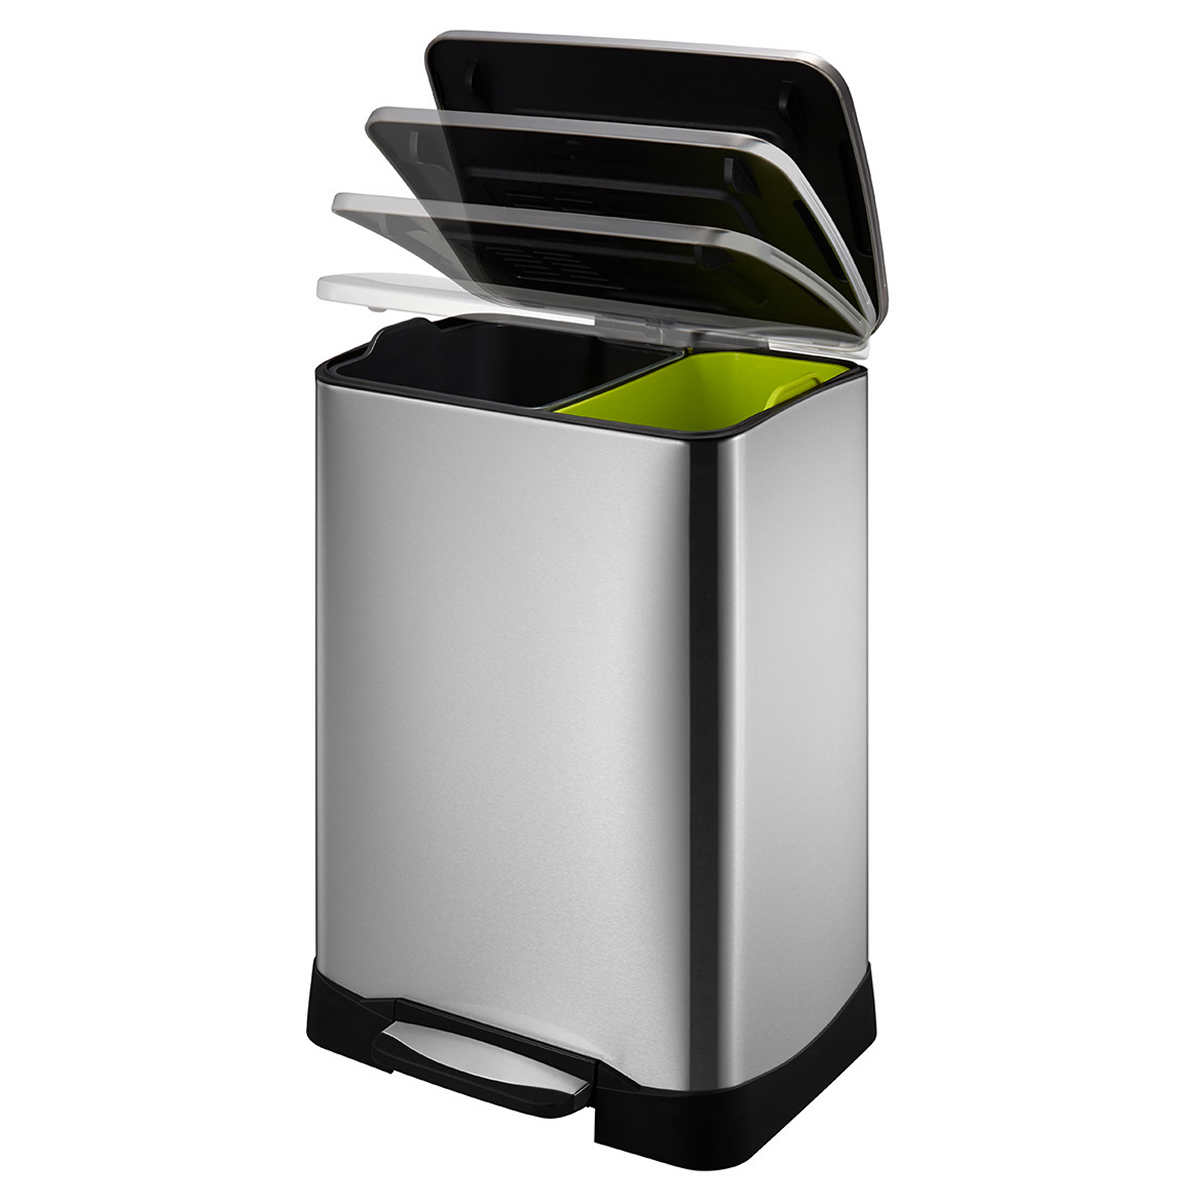 Alluring costco trash can touchless Neocube 50 Liter Dual Compartment 28 And 18 Stainless Steel Recycle Trash Bin Costco